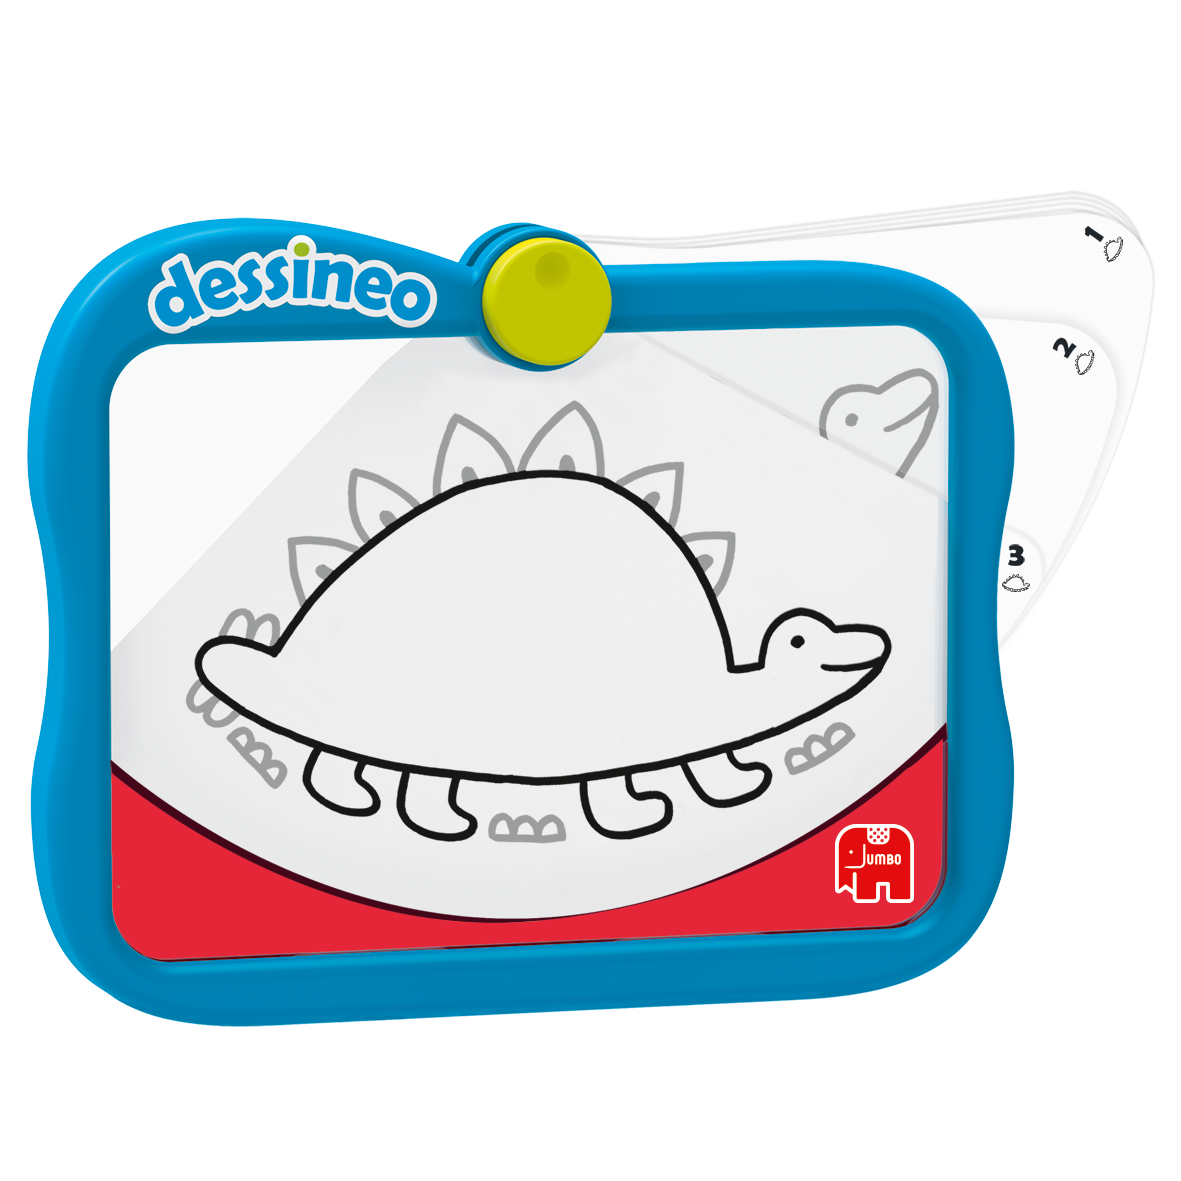 Dessineo Doodle - Learn to draw - Jumbo